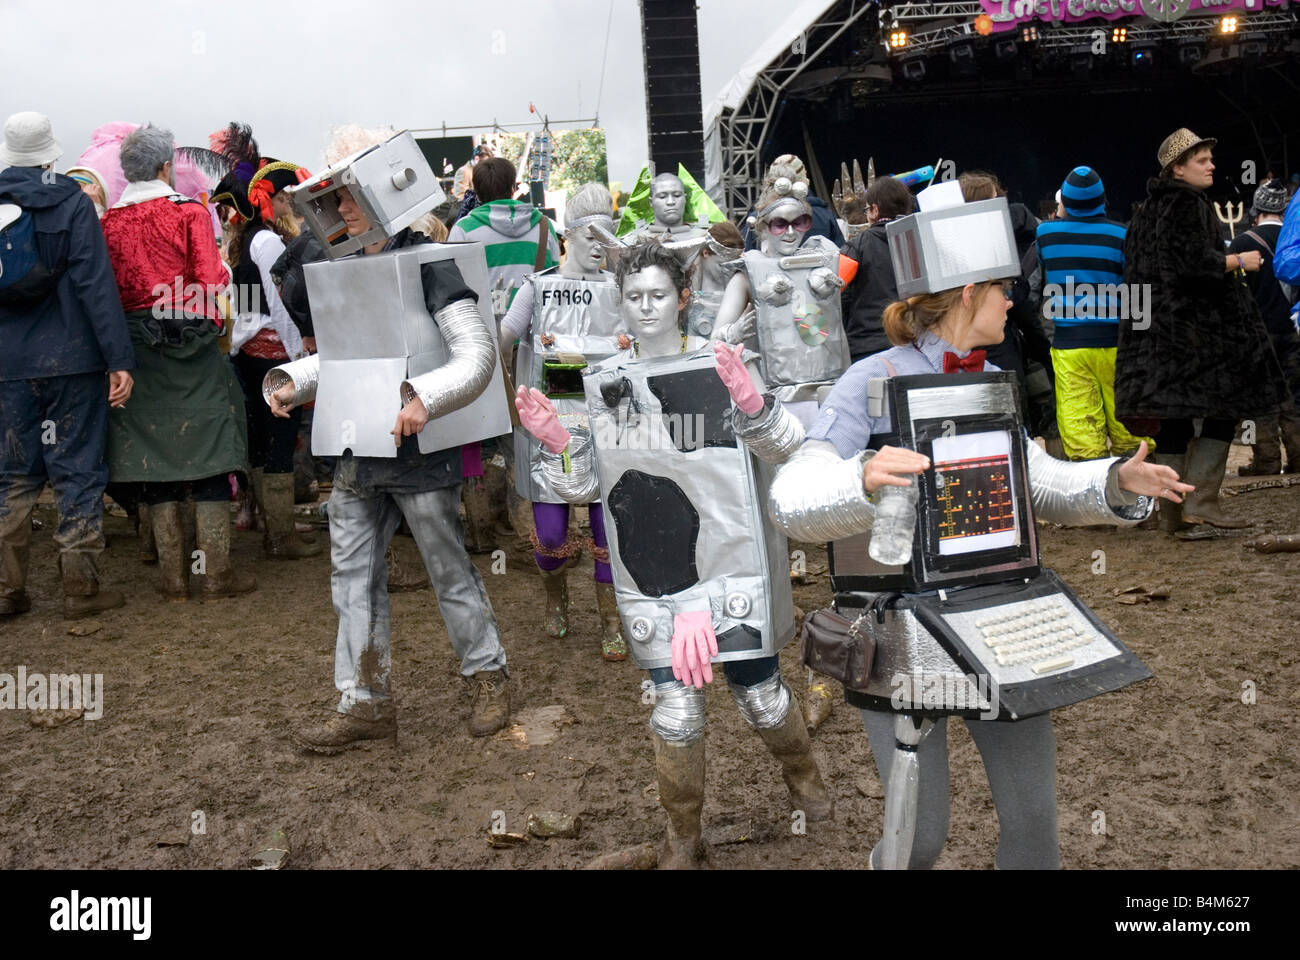 Group of people dressed up as a computer machine, walking in a mud, Bestival , Isle of wight UK 2008 Stock Photo